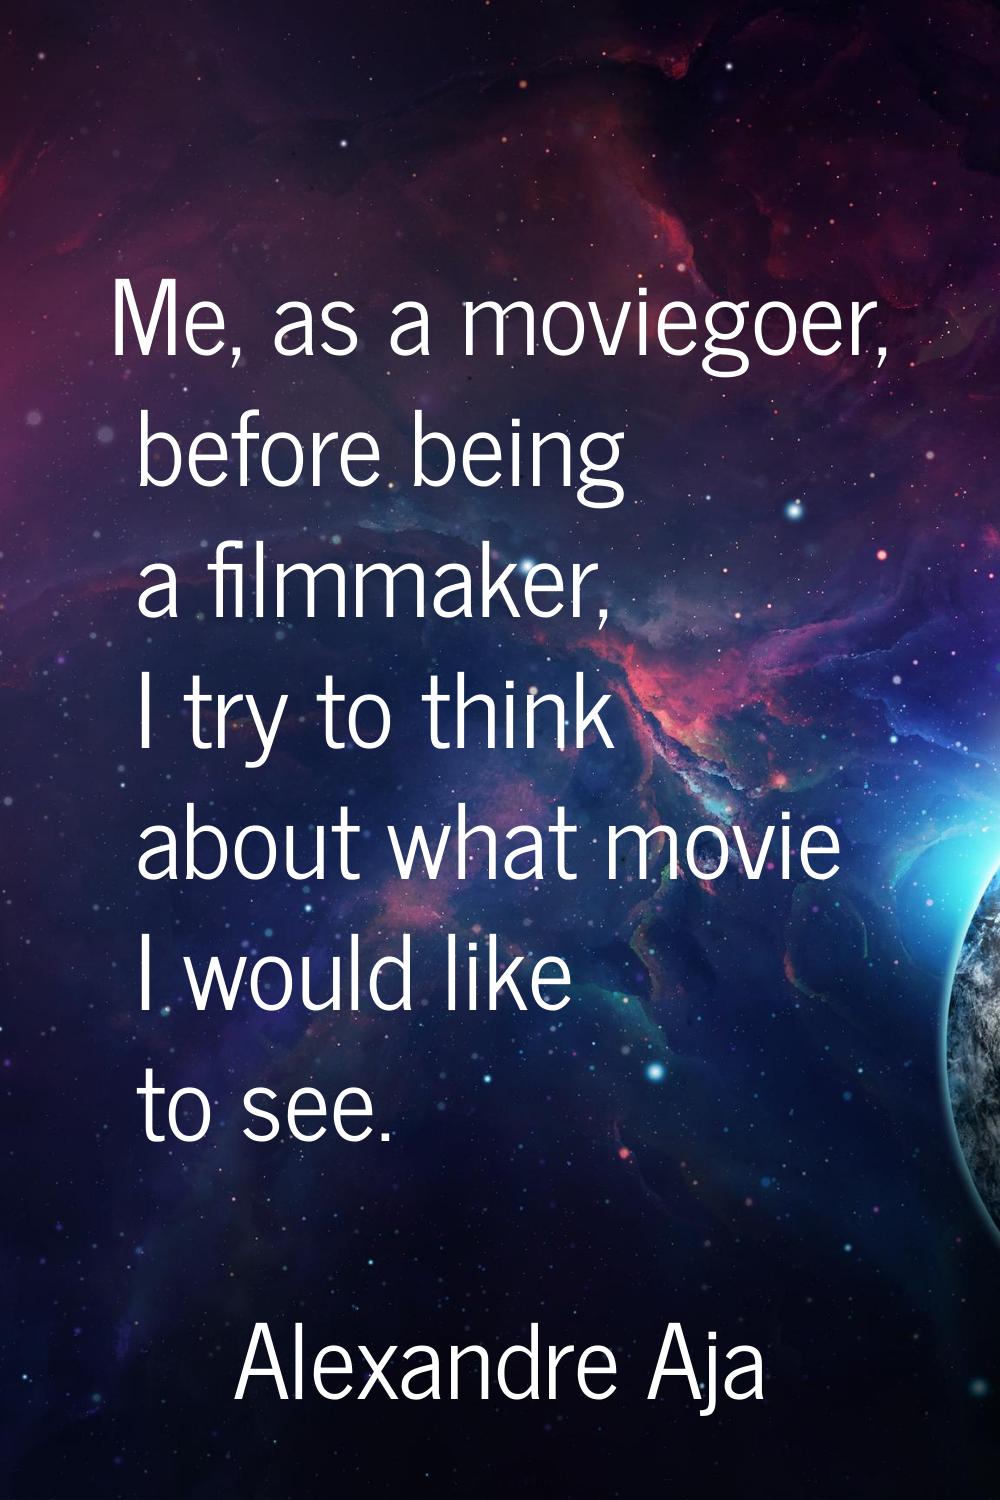 Me, as a moviegoer, before being a filmmaker, I try to think about what movie I would like to see.